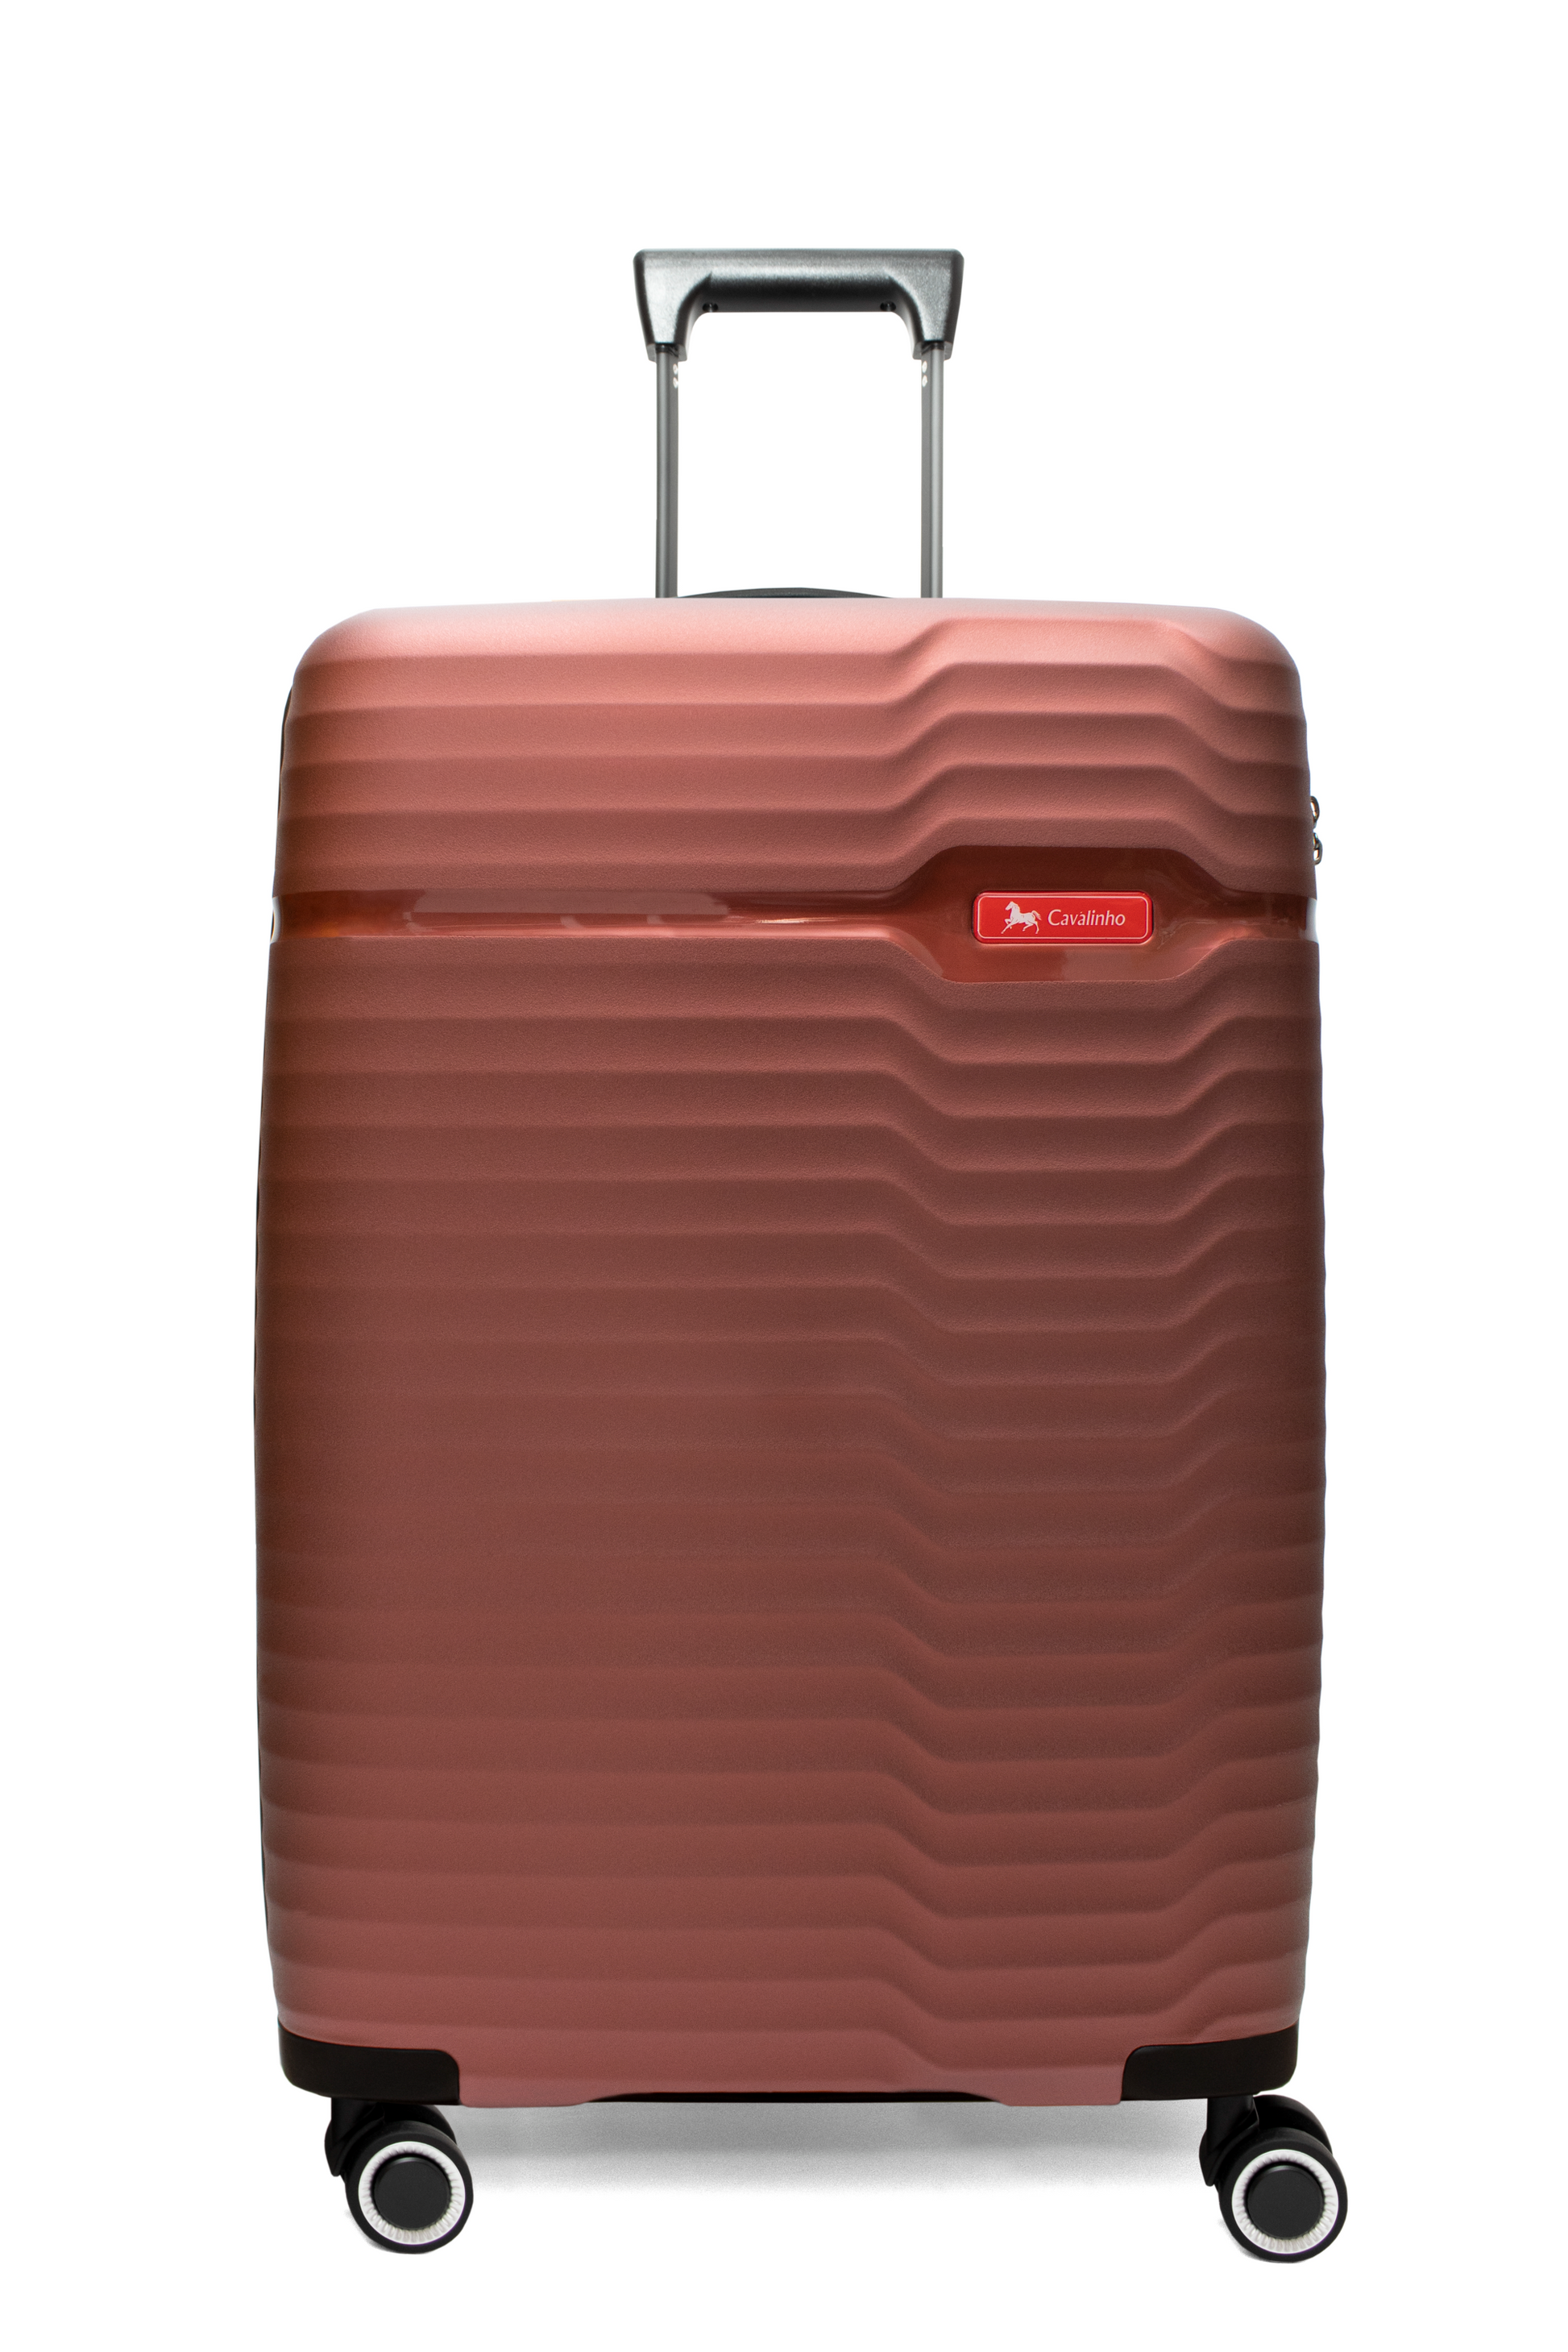 #color_ 24 inch IndianRed | Cavalinho Check-in Hardside Luggage (24" or 28") - 24 inch IndianRed - 68010003.24.24_1